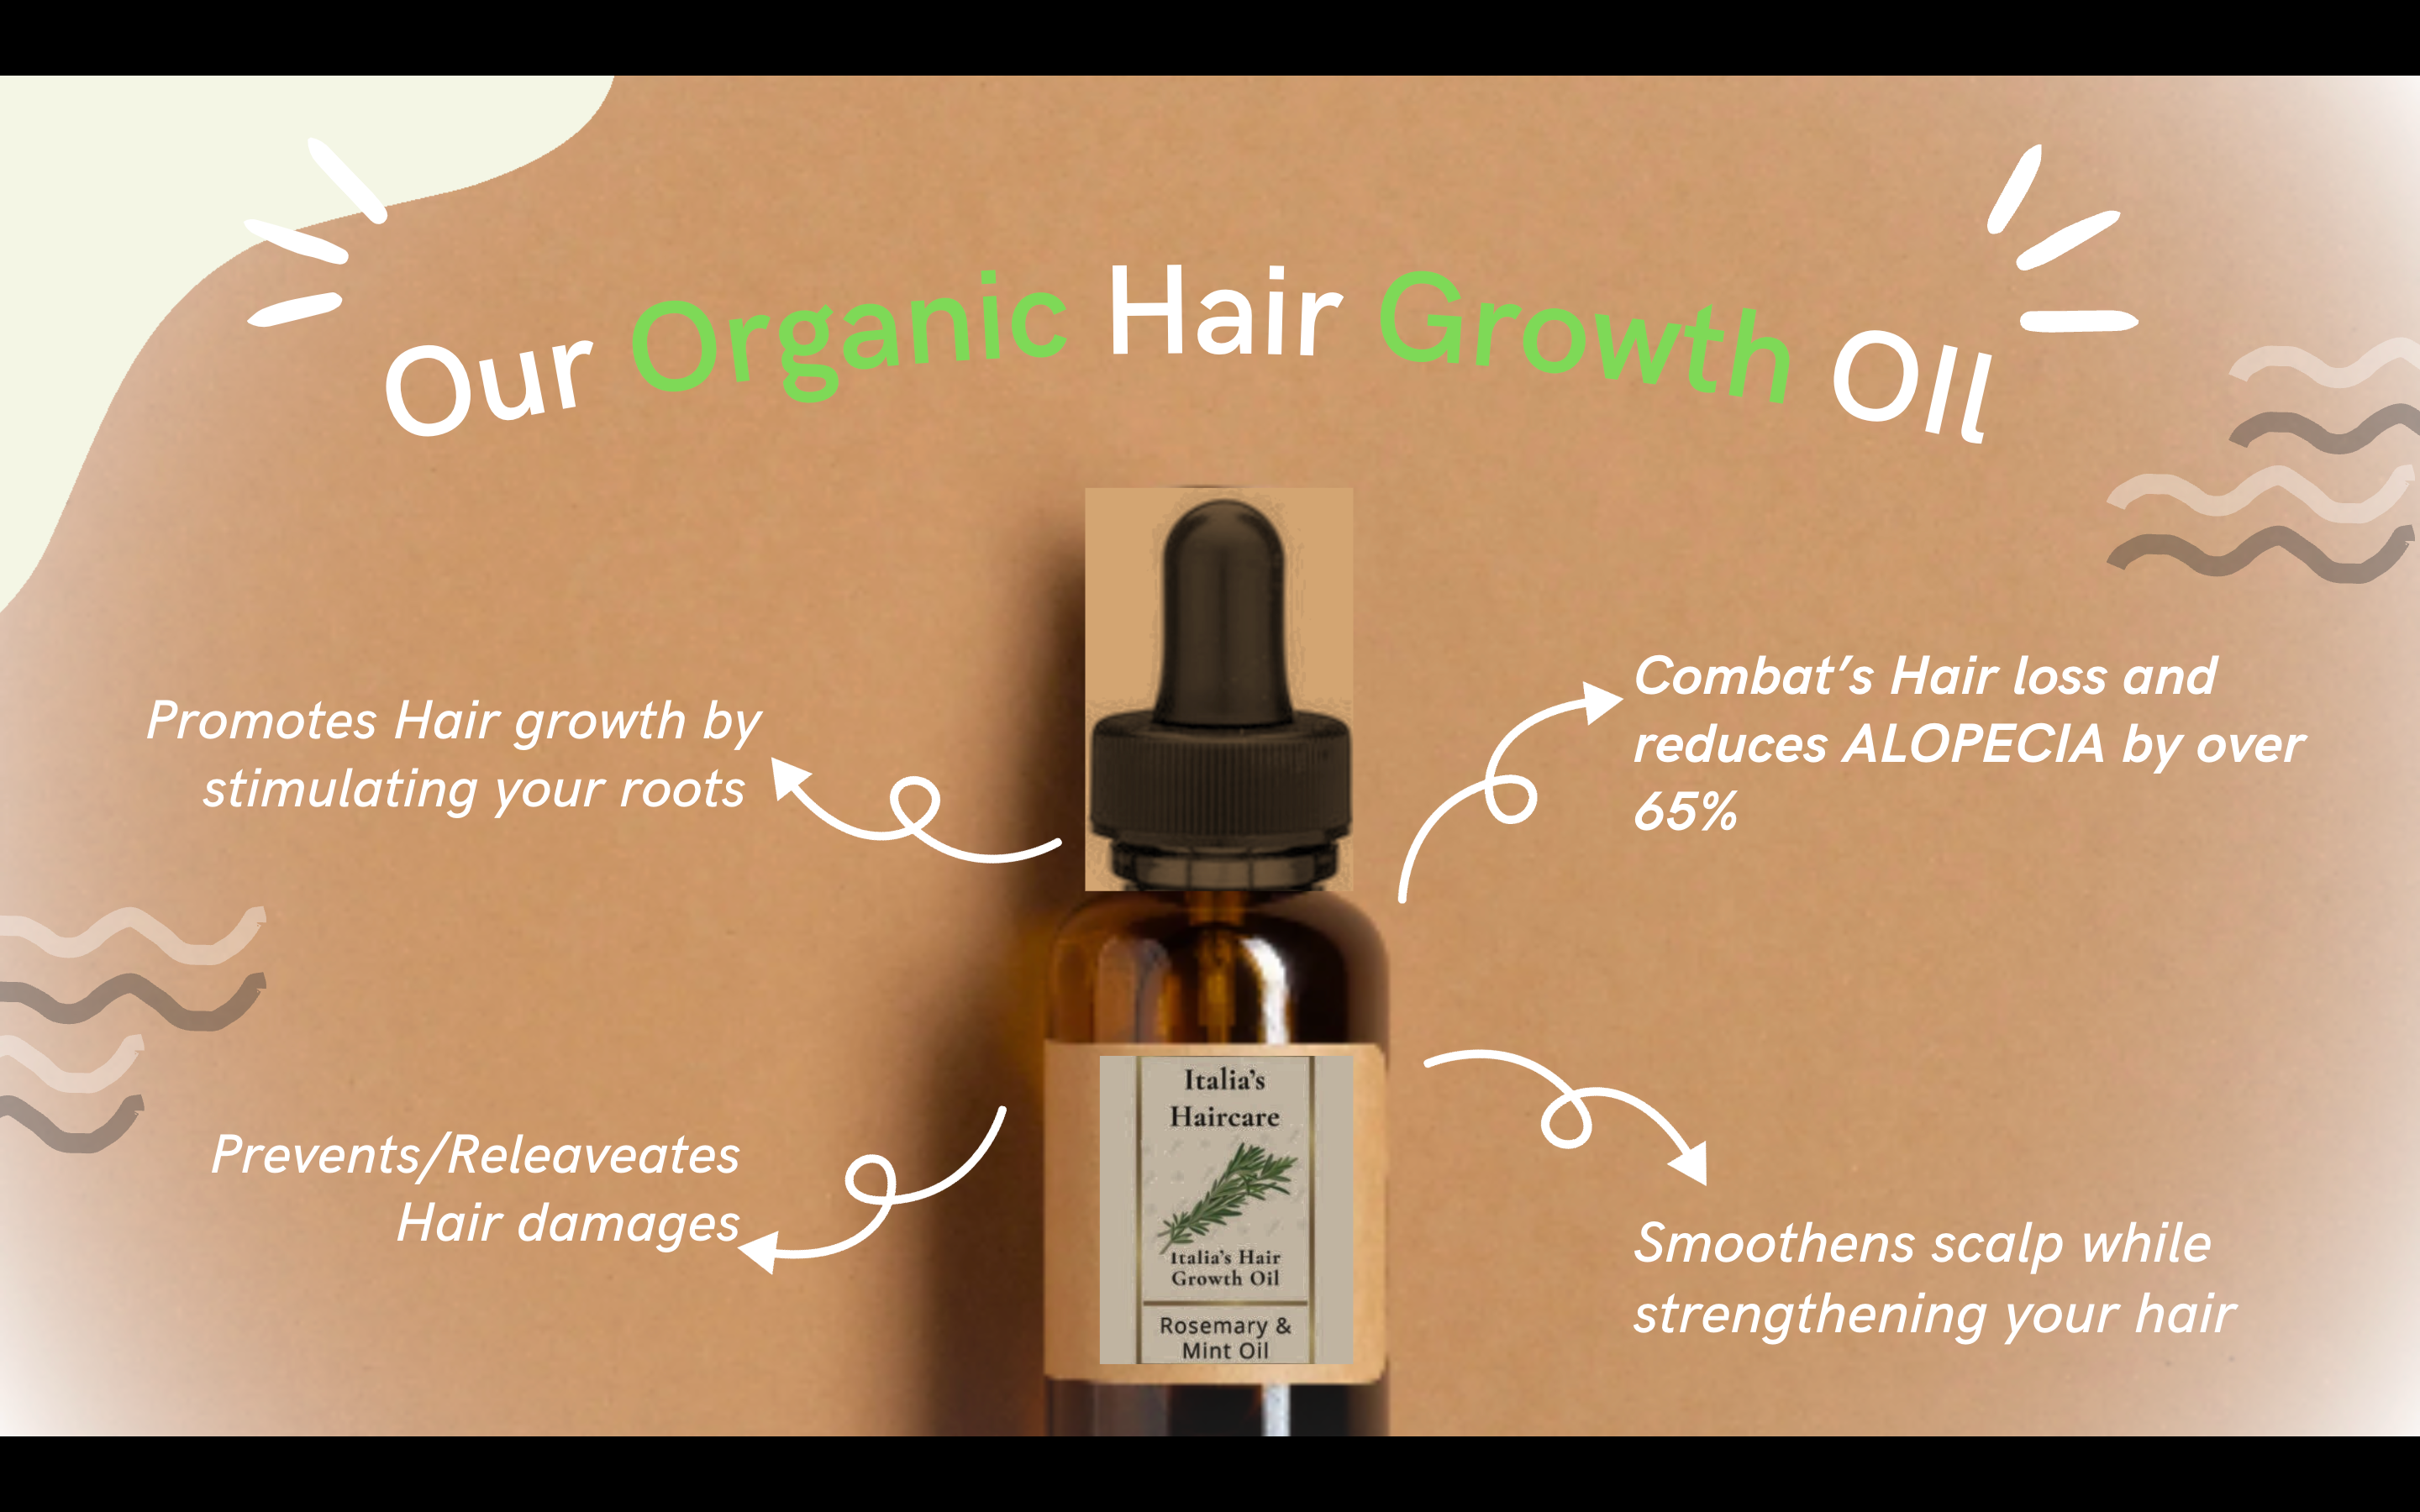 Load video: Heres a short video telling you about our best selling hair growth oil.